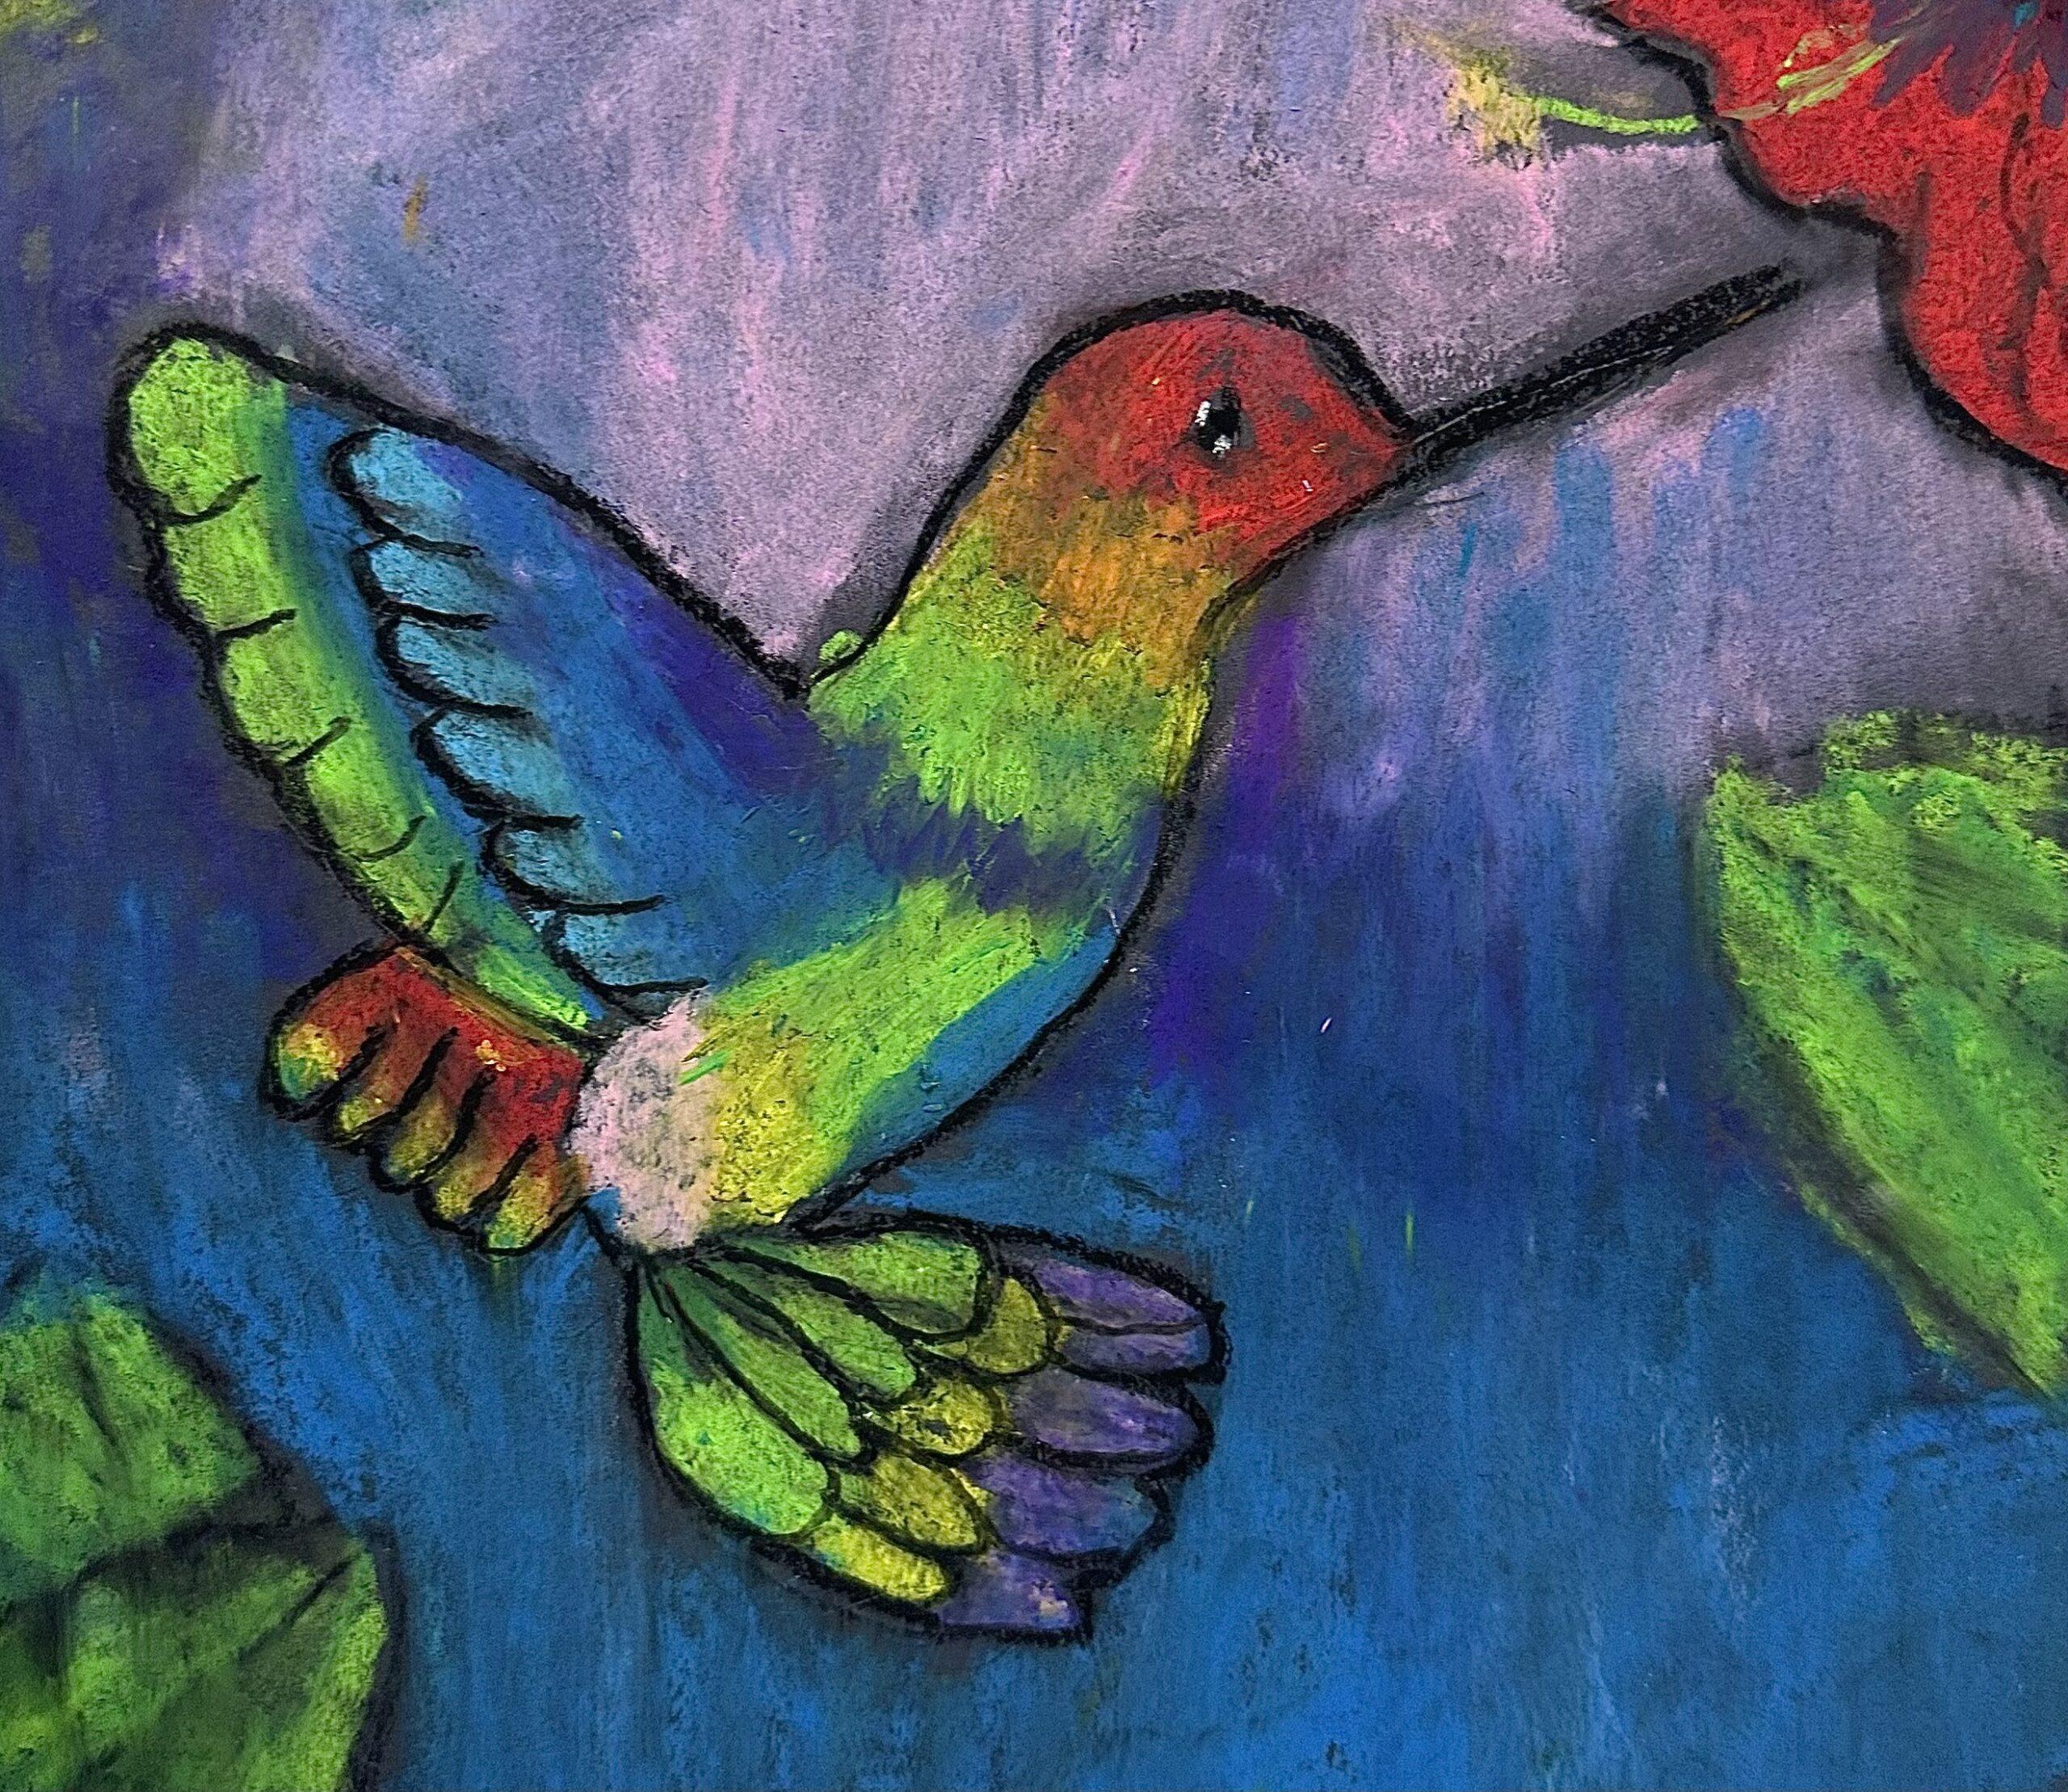 Painting of Hummingbird done by Kids during art camp at Raleigh location..